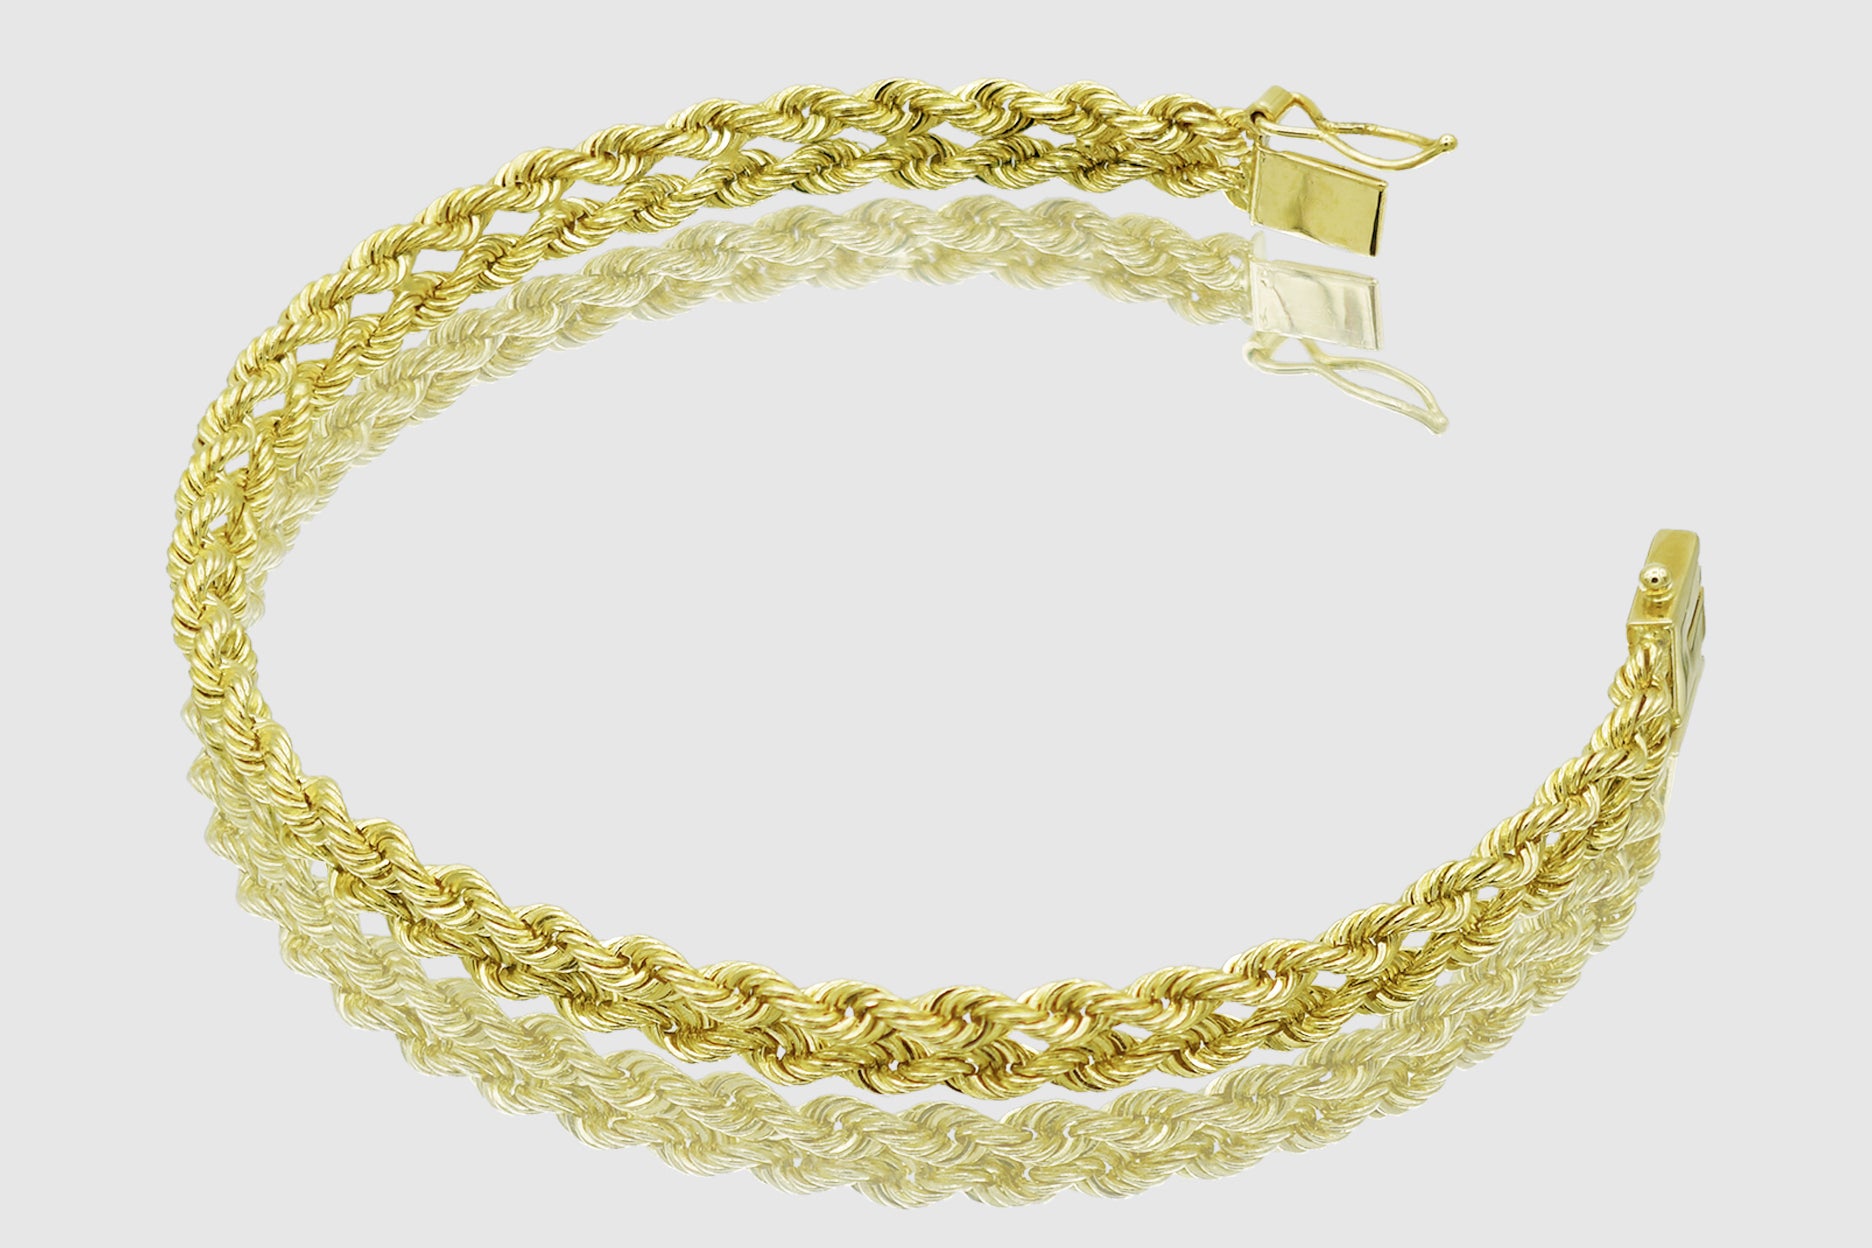 SOLID 14K YELLOW GOLD TWISTED ROPE CHAIN BRACELET 3mm MENS LADIES